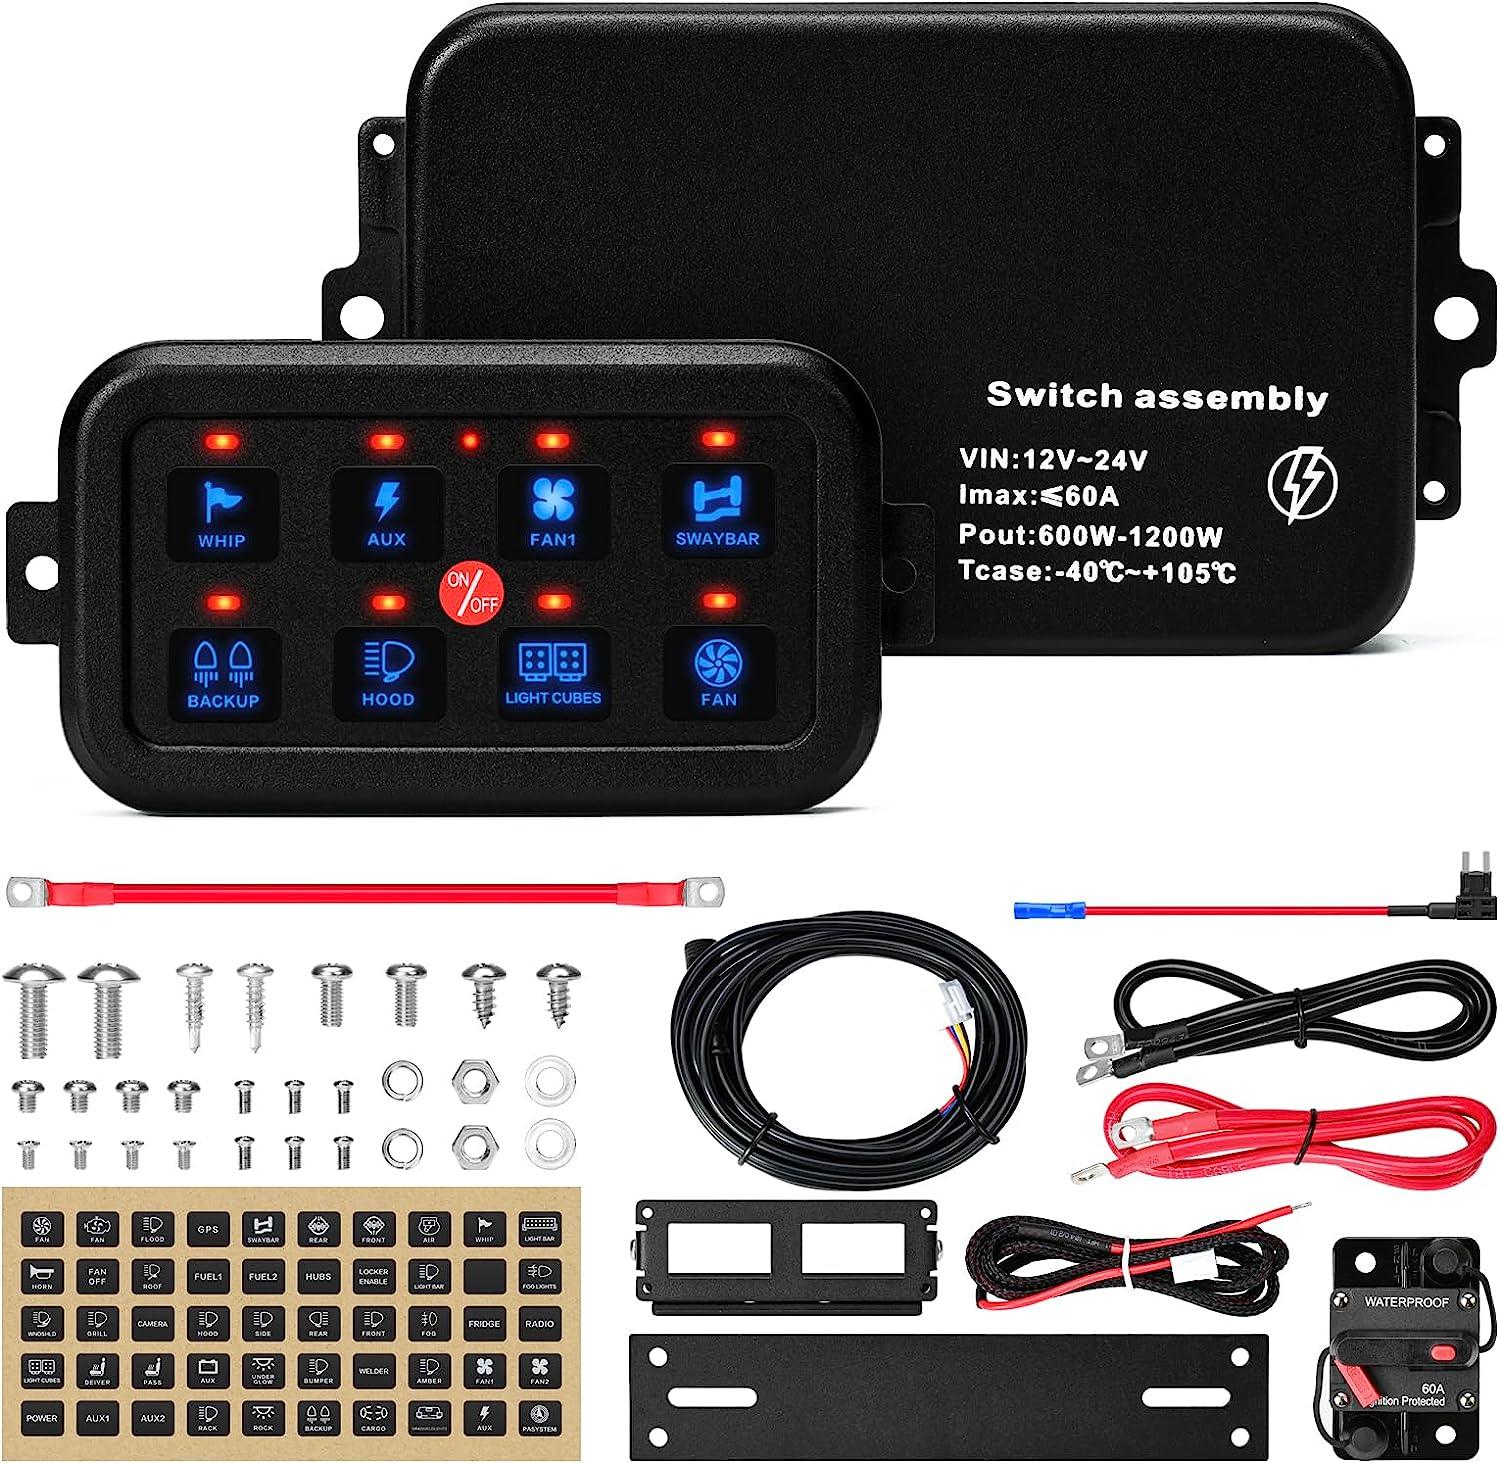 8 Gang Switch Panel, Briidea Switch Panel for Car with All Metal Housing, Multifunction 12V-24V, Ideal for Car, Golf Cart, ATV, UTV, RV, Truck, Enhance Your Driving Experience - briidea